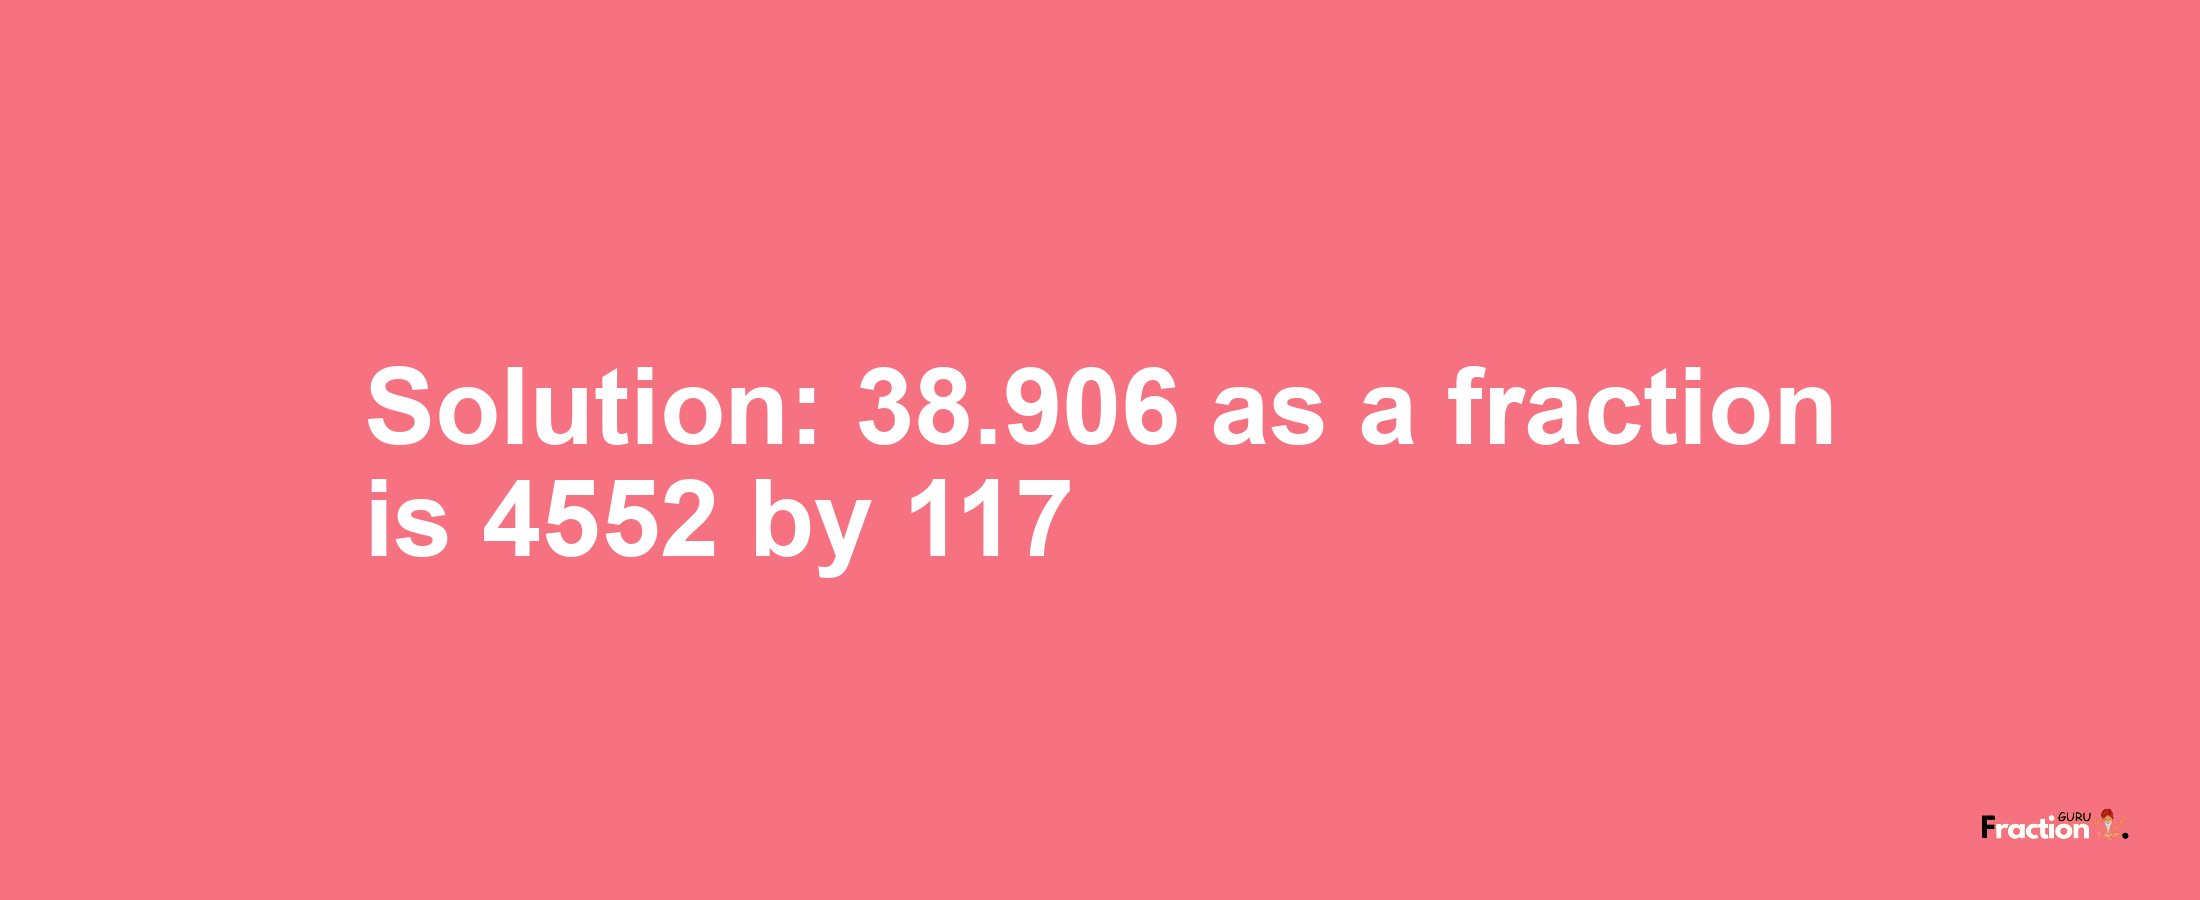 Solution:38.906 as a fraction is 4552/117